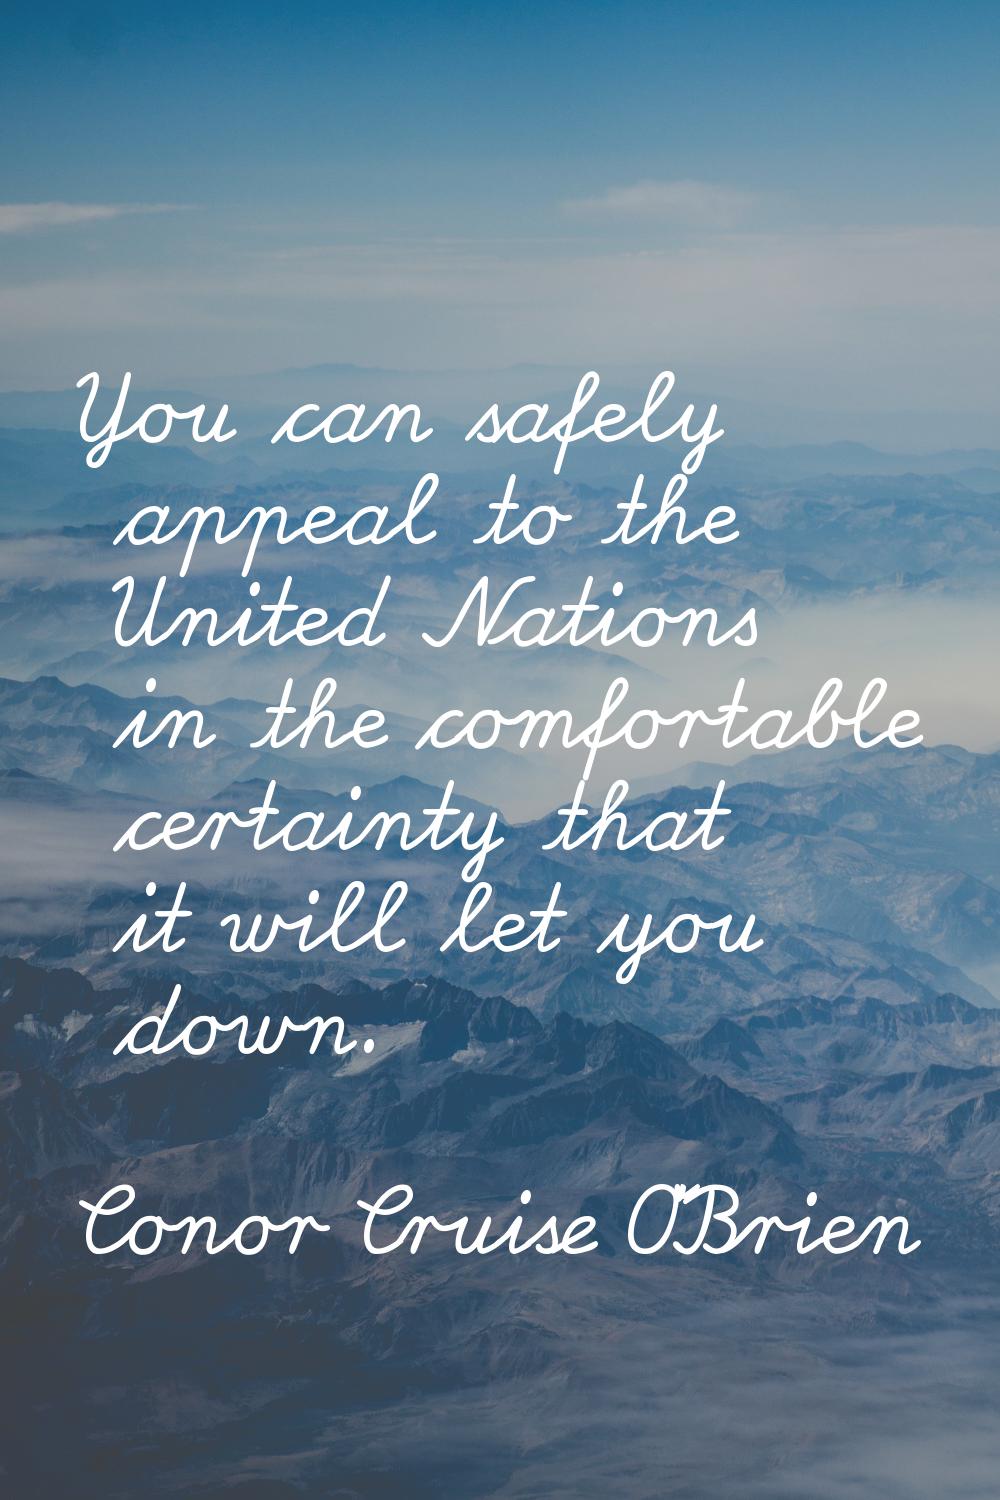 You can safely appeal to the United Nations in the comfortable certainty that it will let you down.